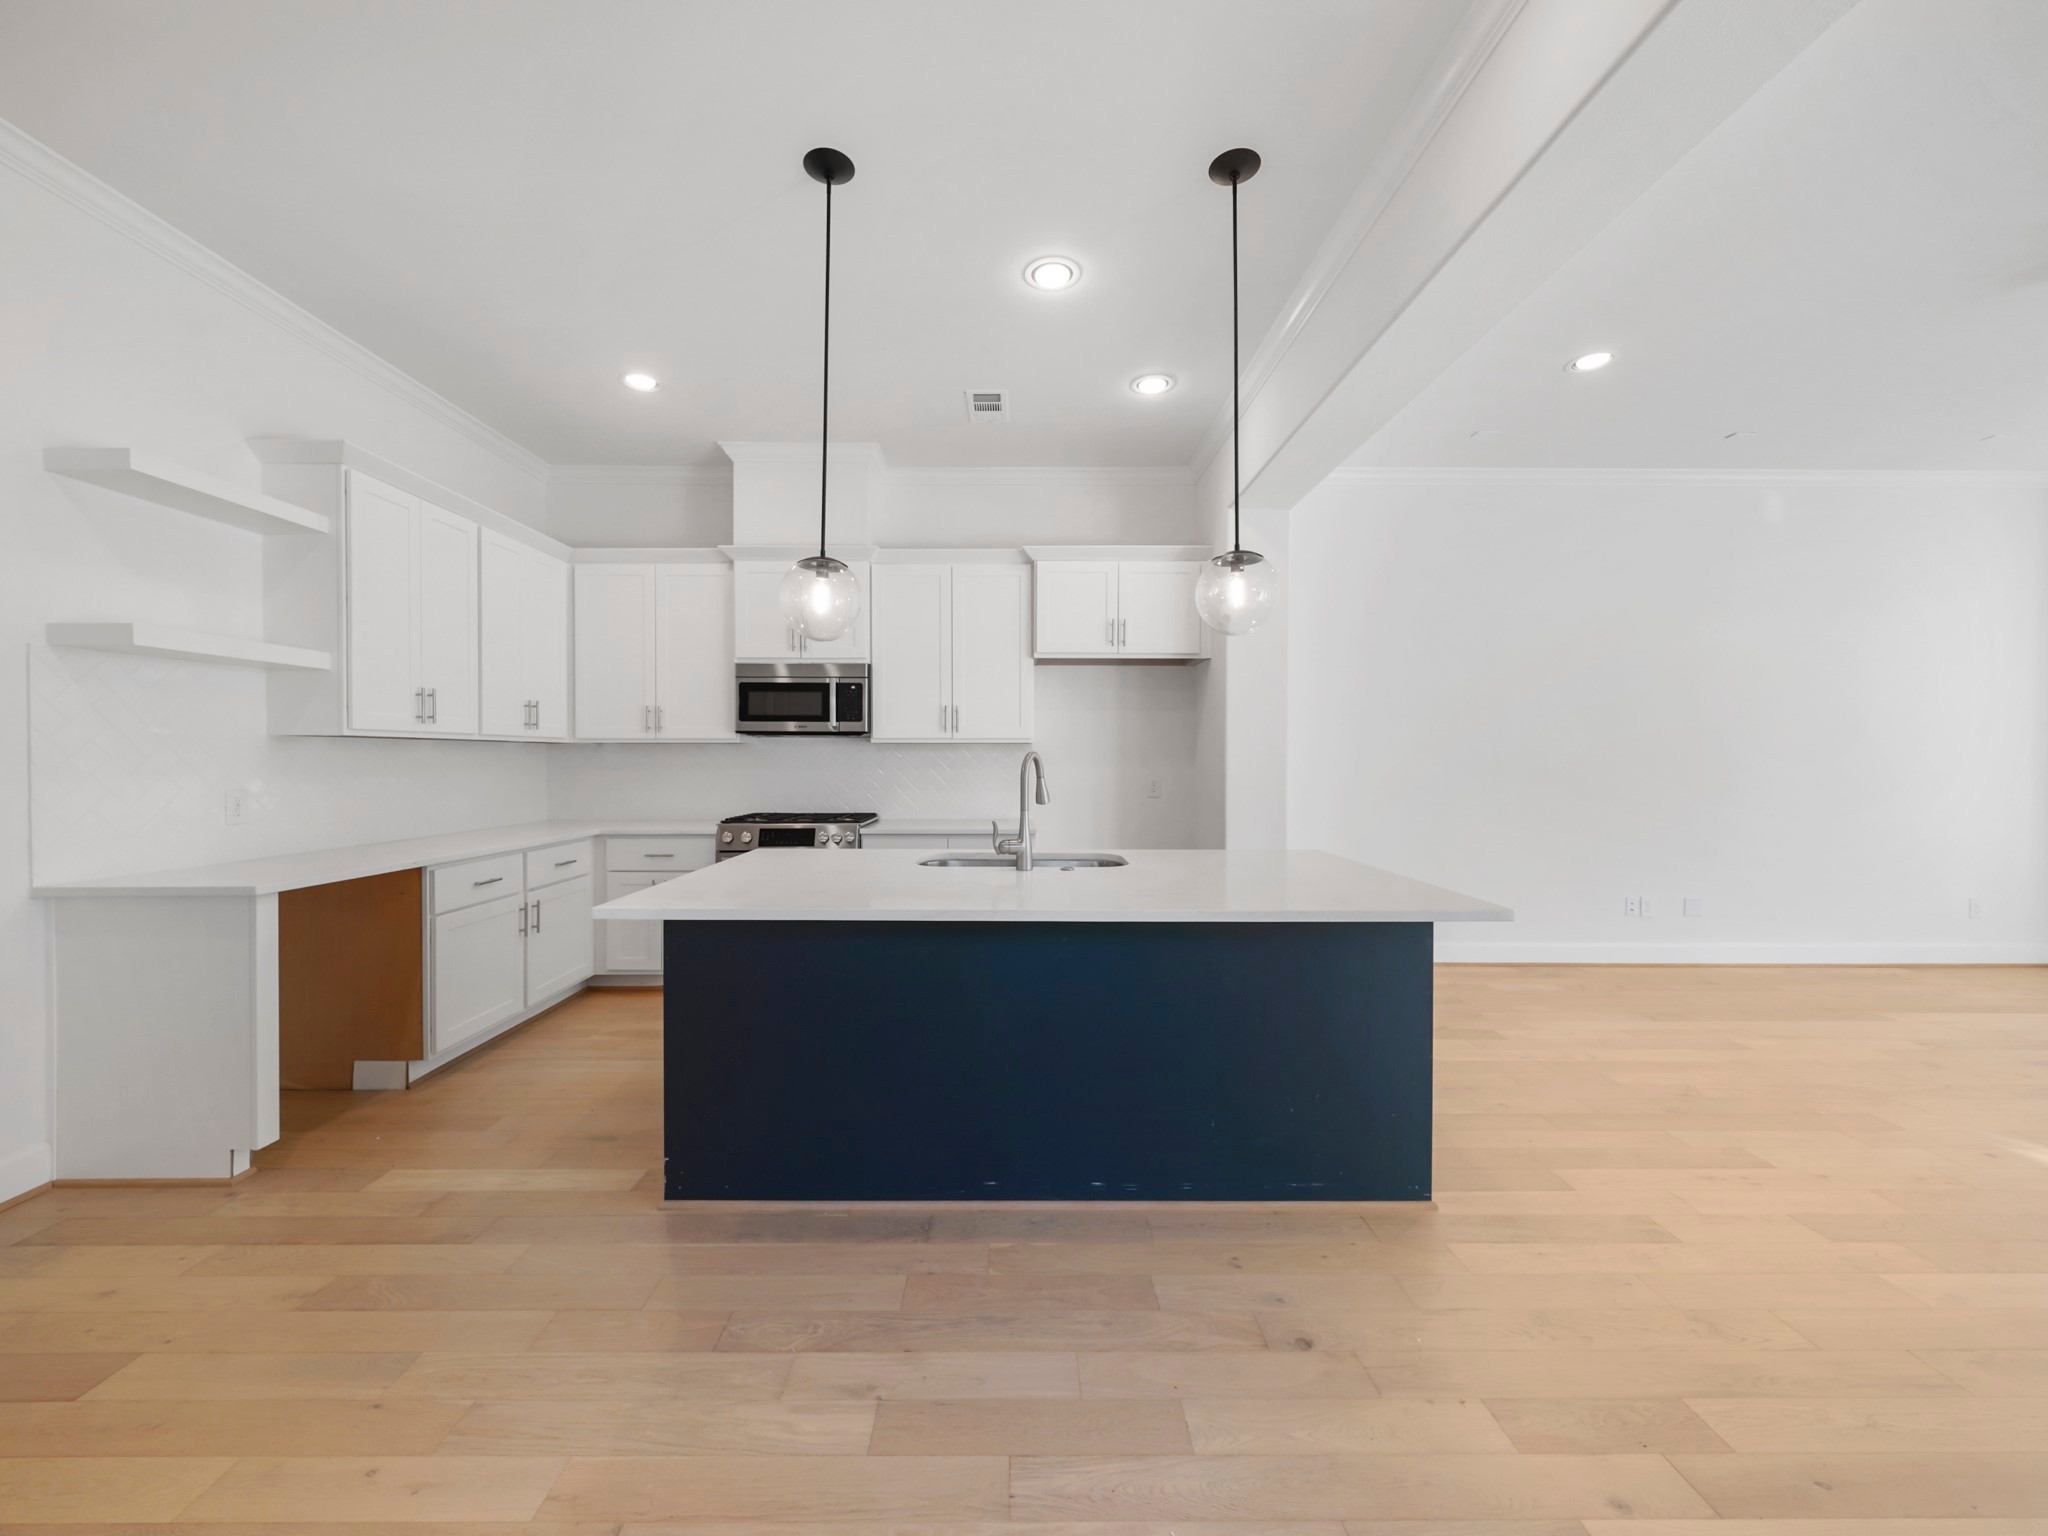 Step into 612 E.28th's kitchen—custom cabinetry & elegant floating shelves await your culinary inspiration!